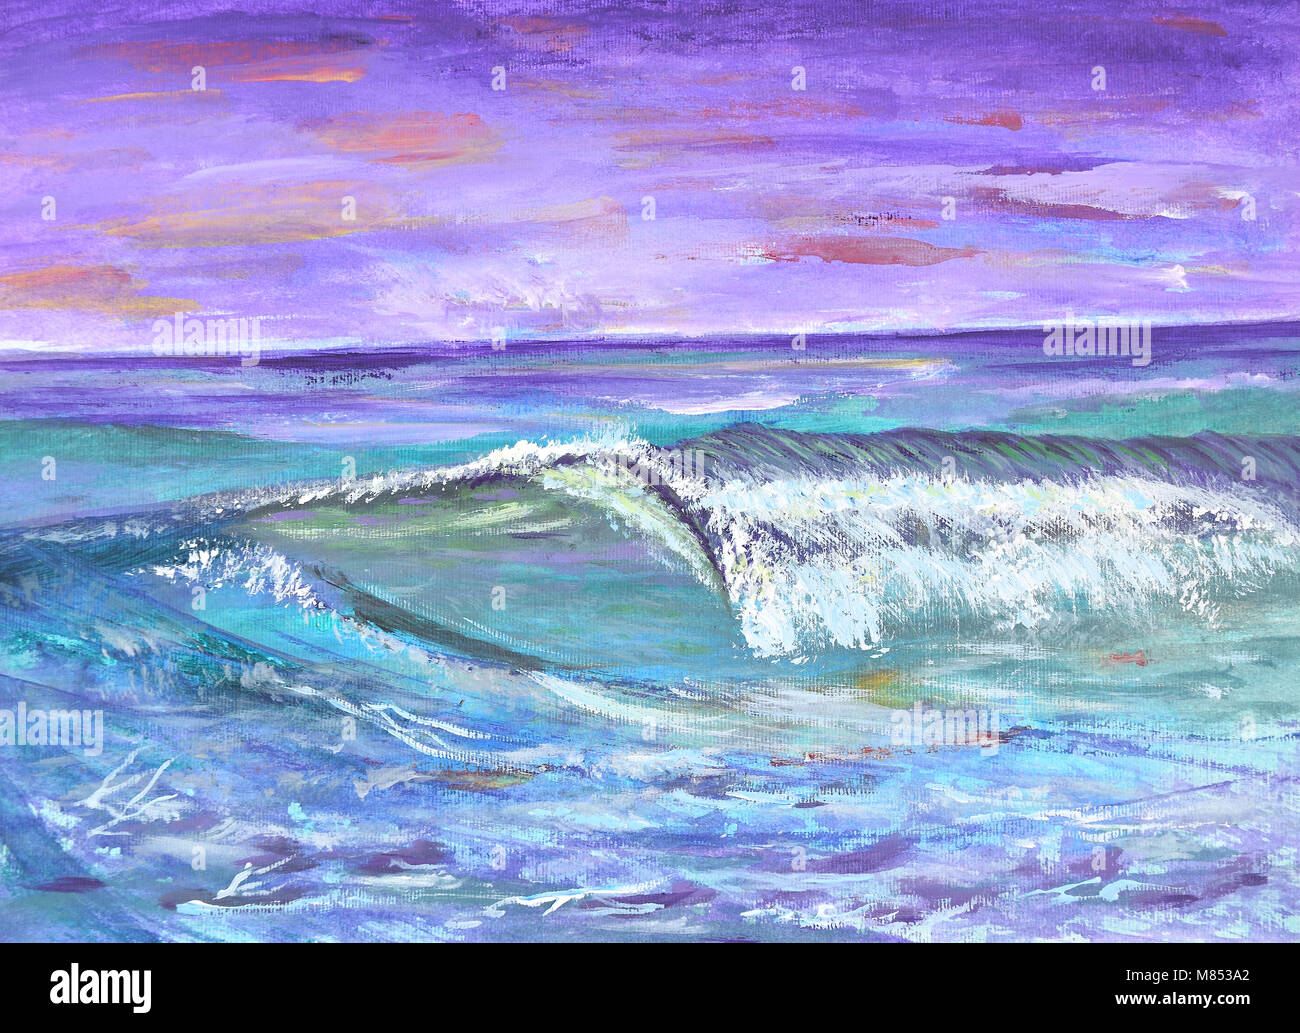 Sea wave with foam and fiery sunset colourful painting Stock Photo